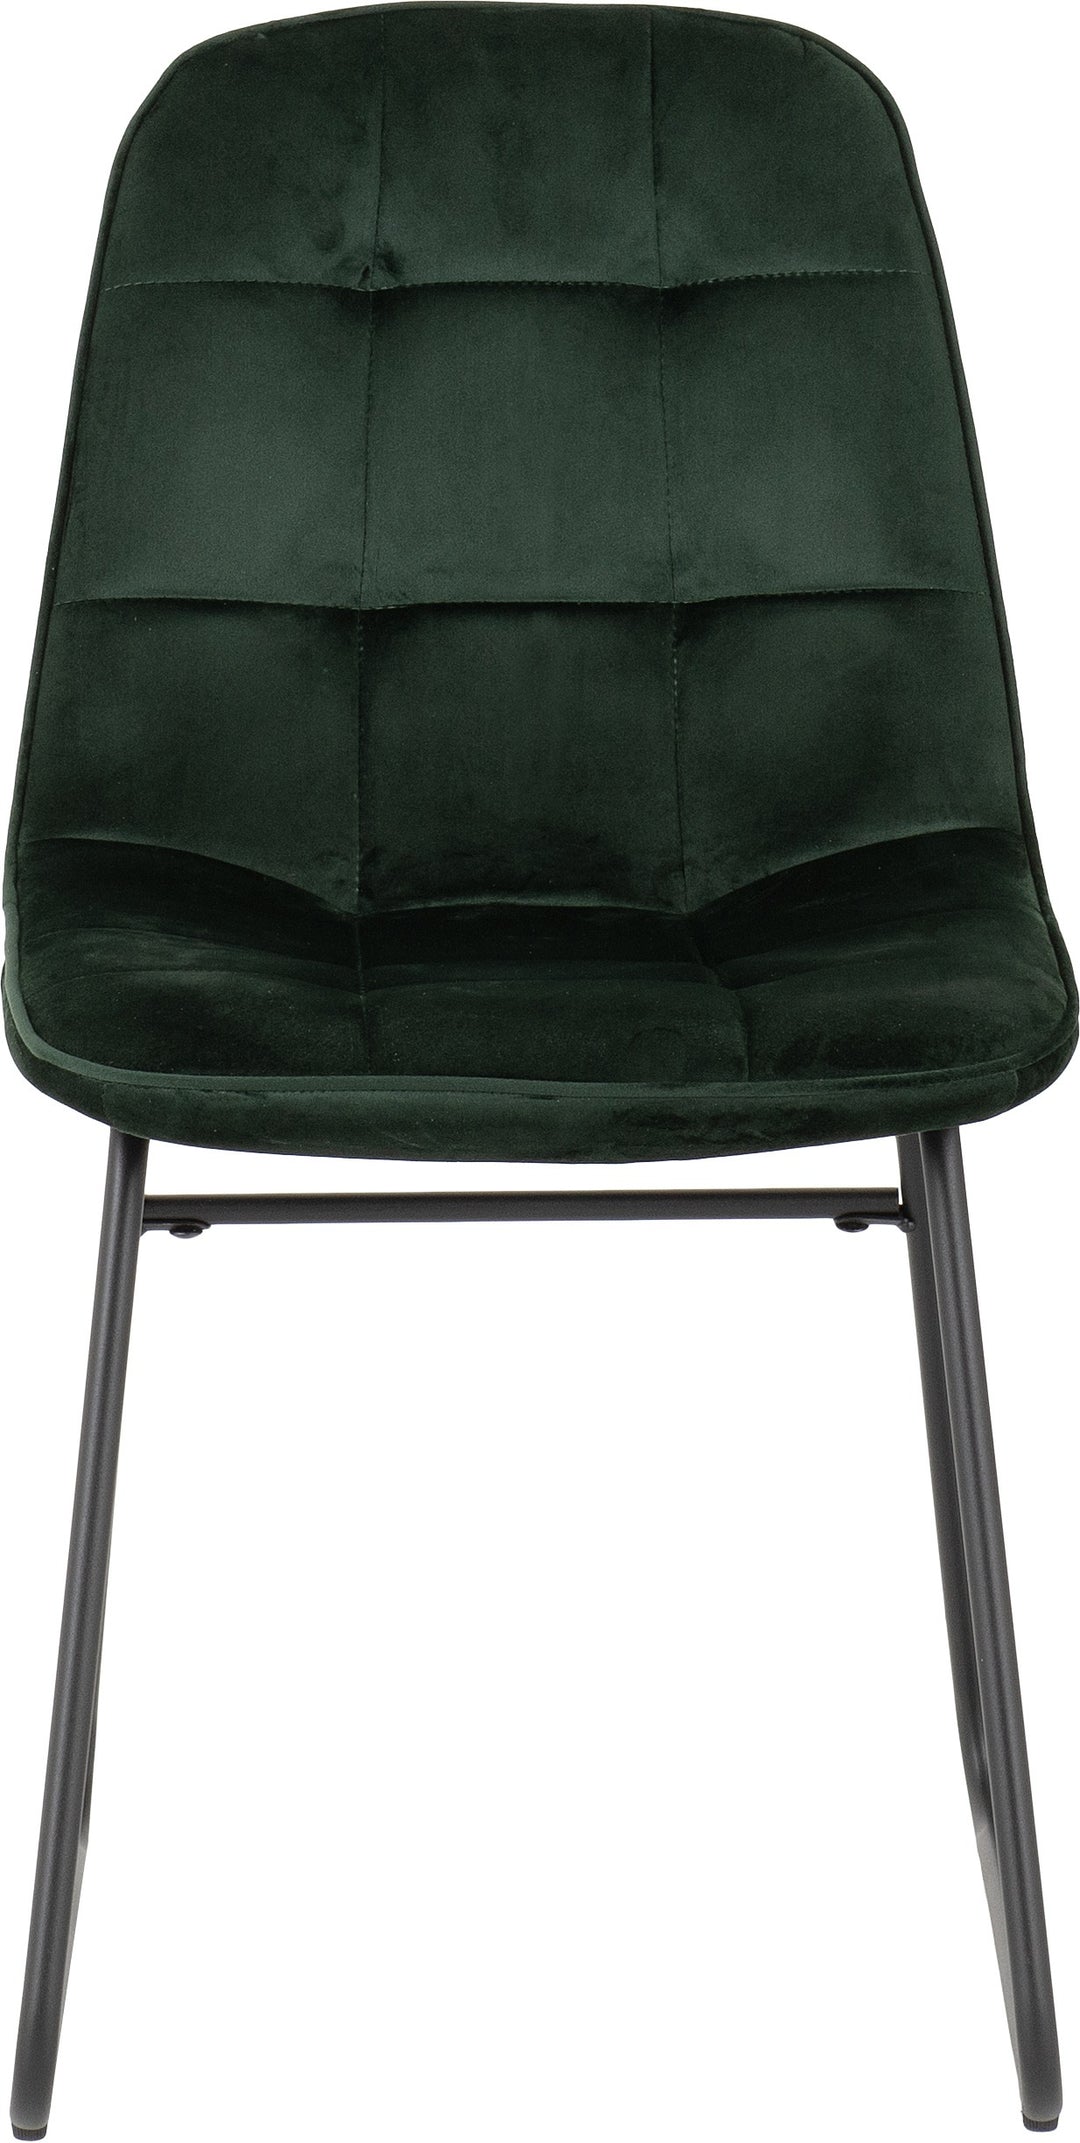 Athens Round & Lukas Dining Set (X4 Chairs) - Concrete/Emerald Green Velvet